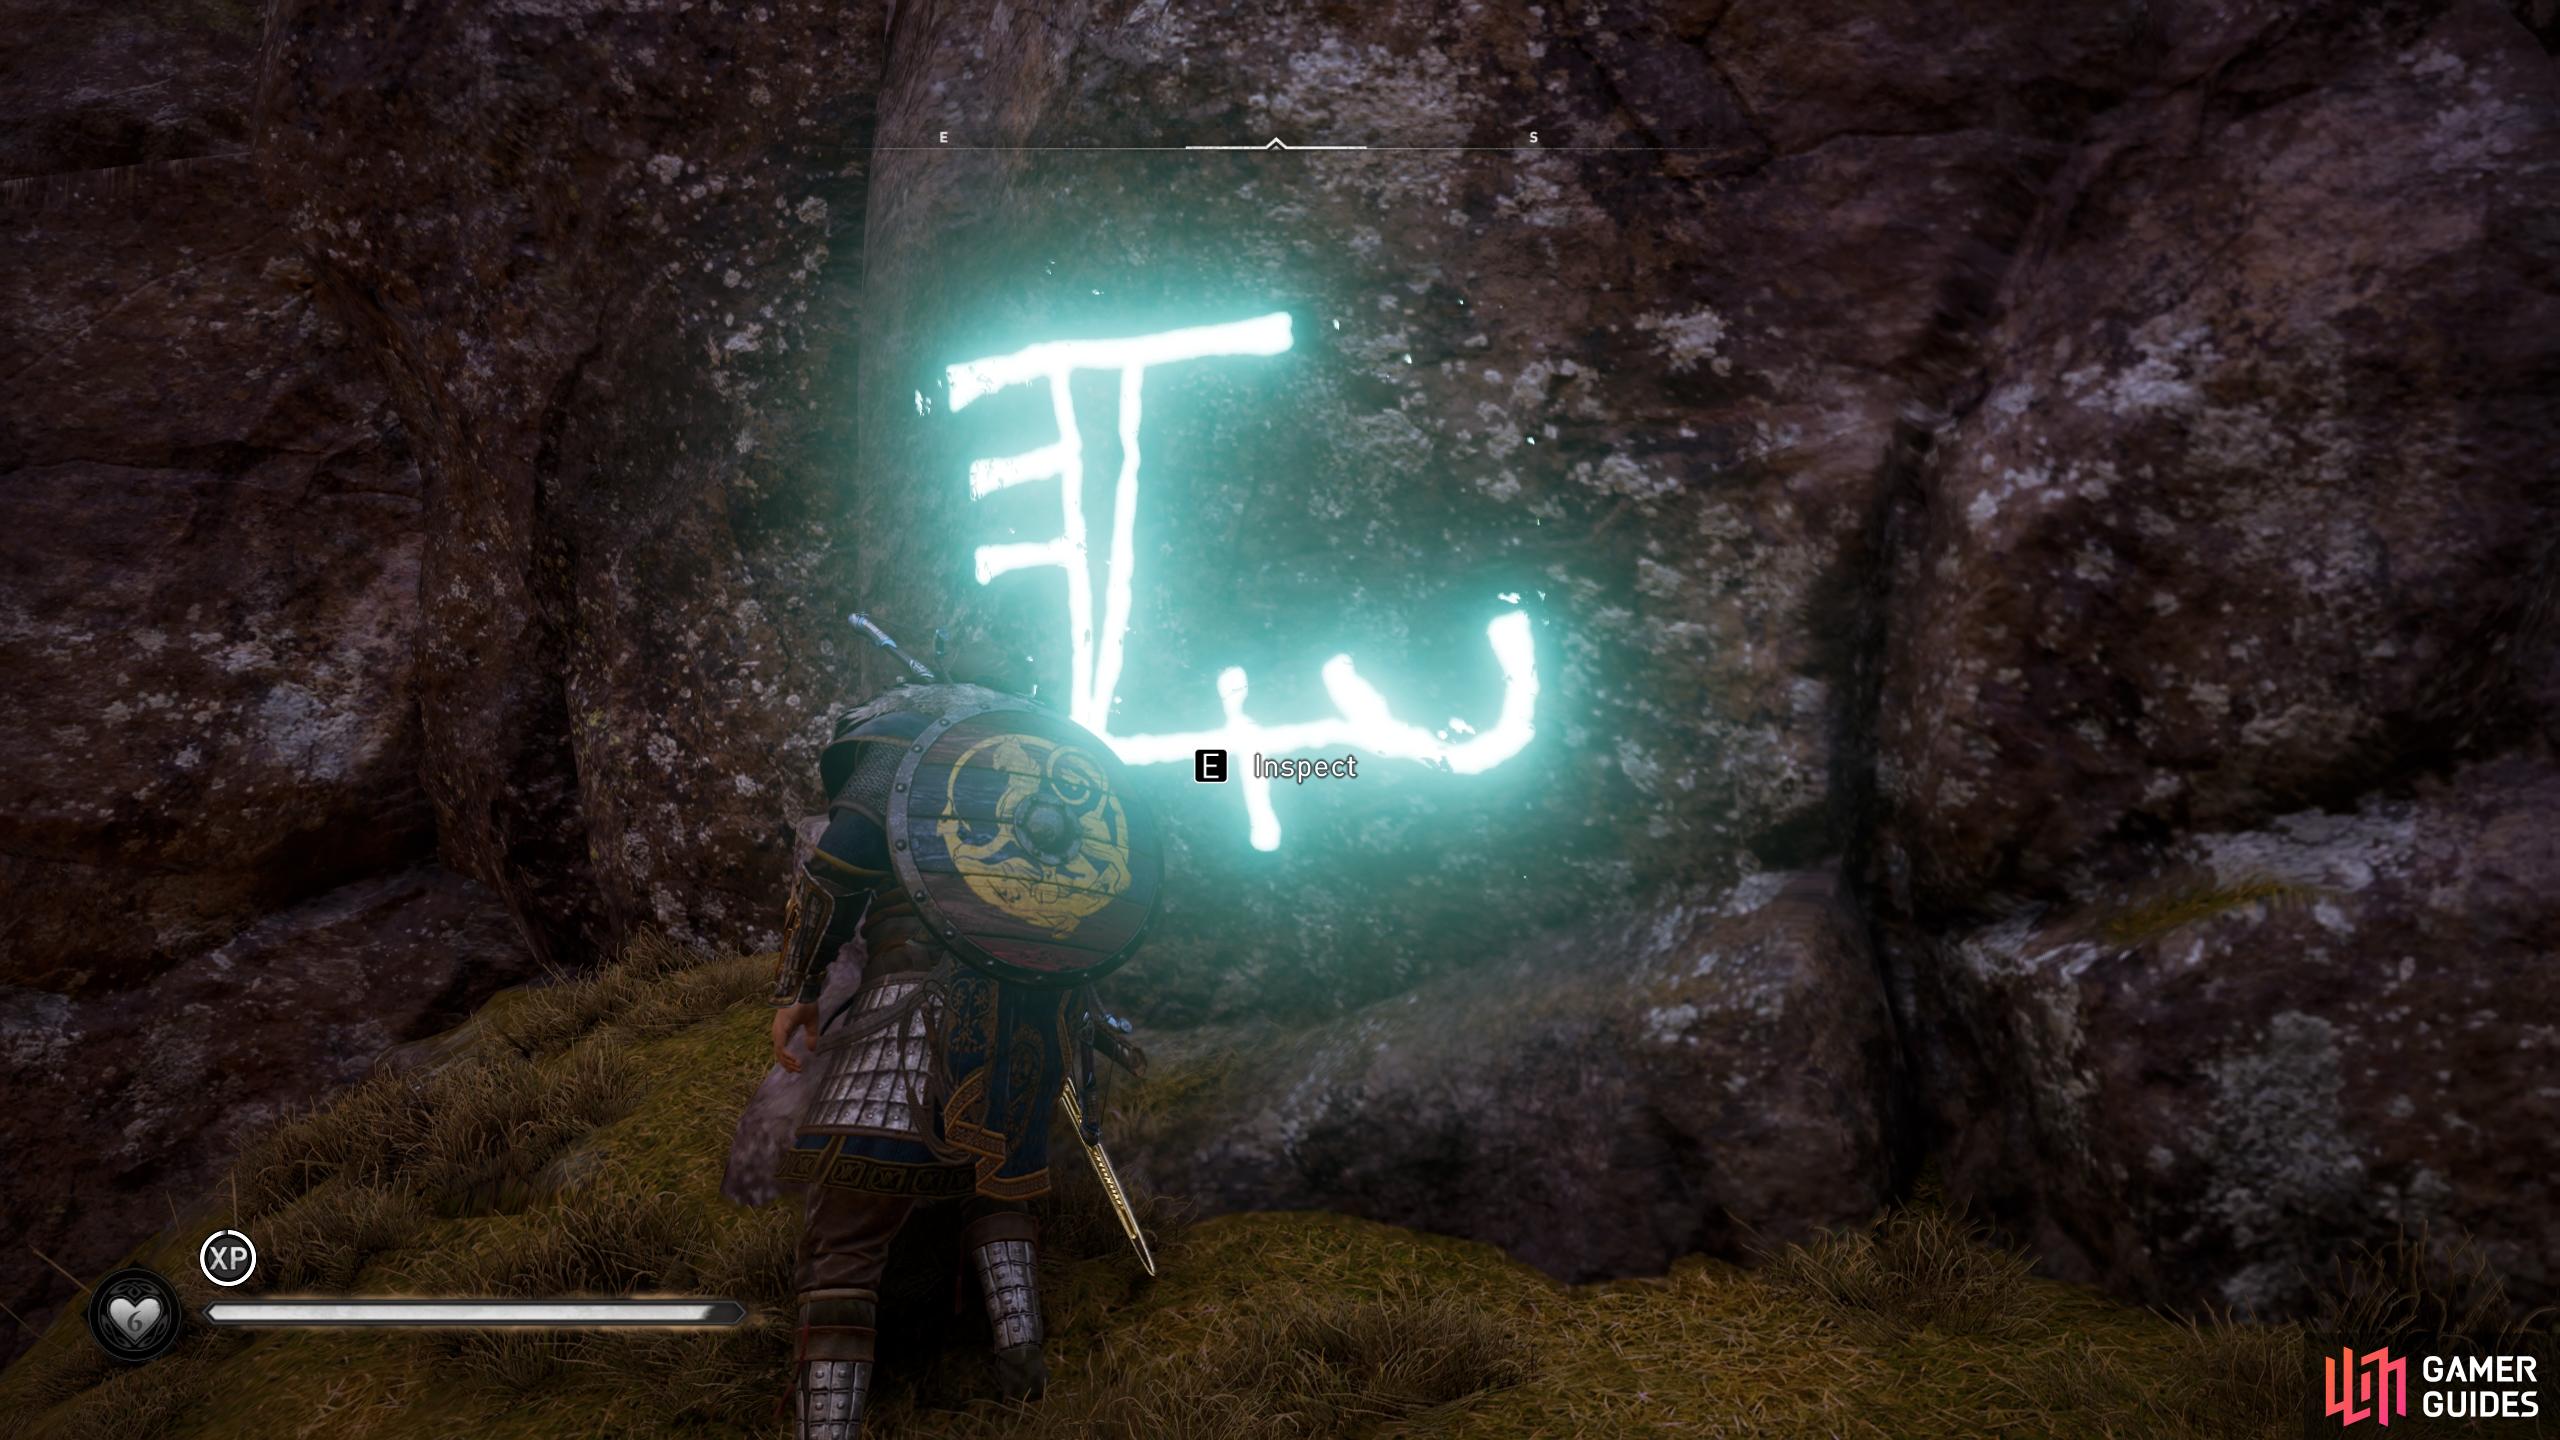 Use Odin's Sight to highlight the runic inscription, then interact with it to reveal the entrance.